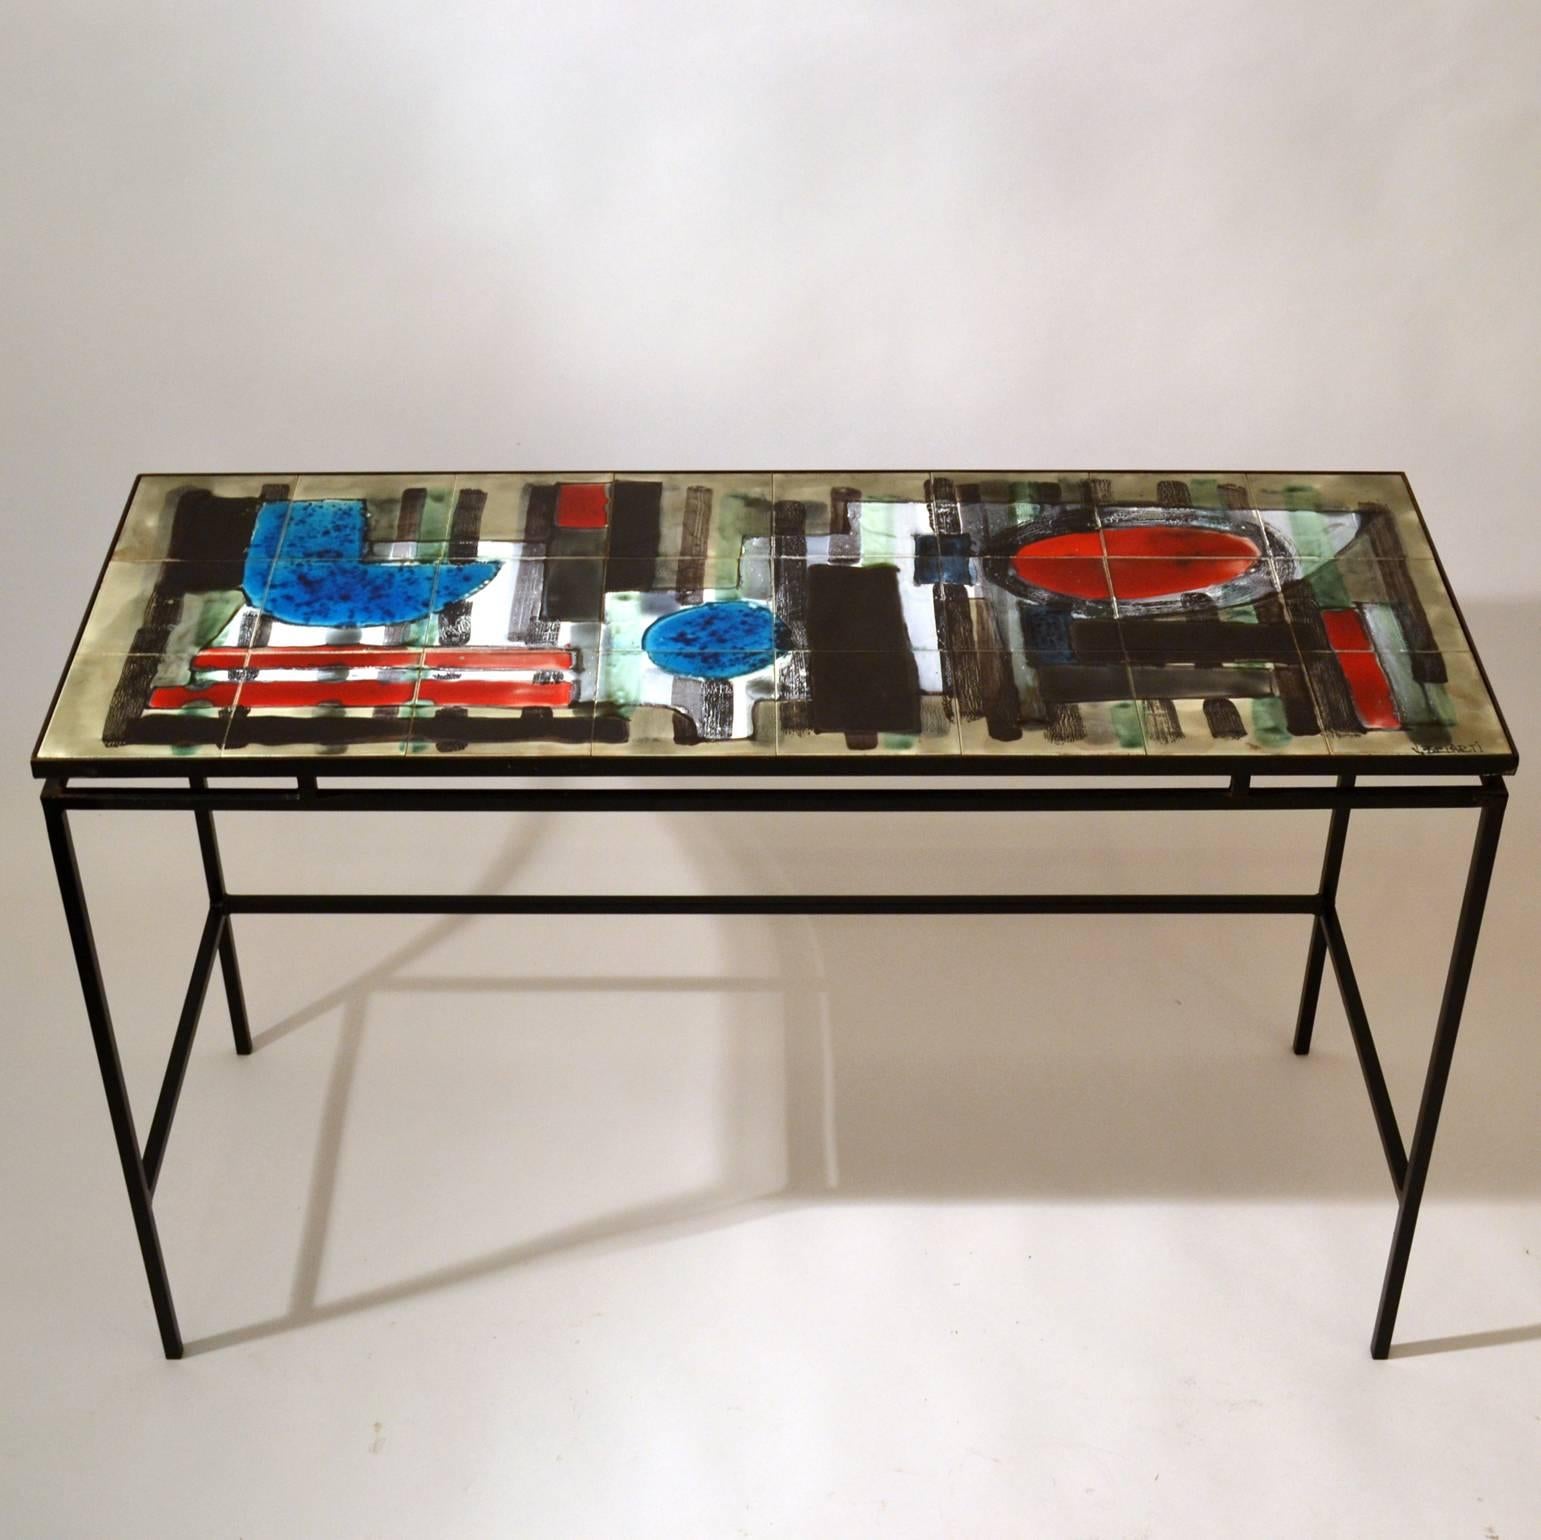 Modernist desk or console table with hand-painted tiled top in abstract design with splashes of bright colors red and blue on a suspended black metal frame, signed by Juliette Belarti, Belgium, circa 1960.
 